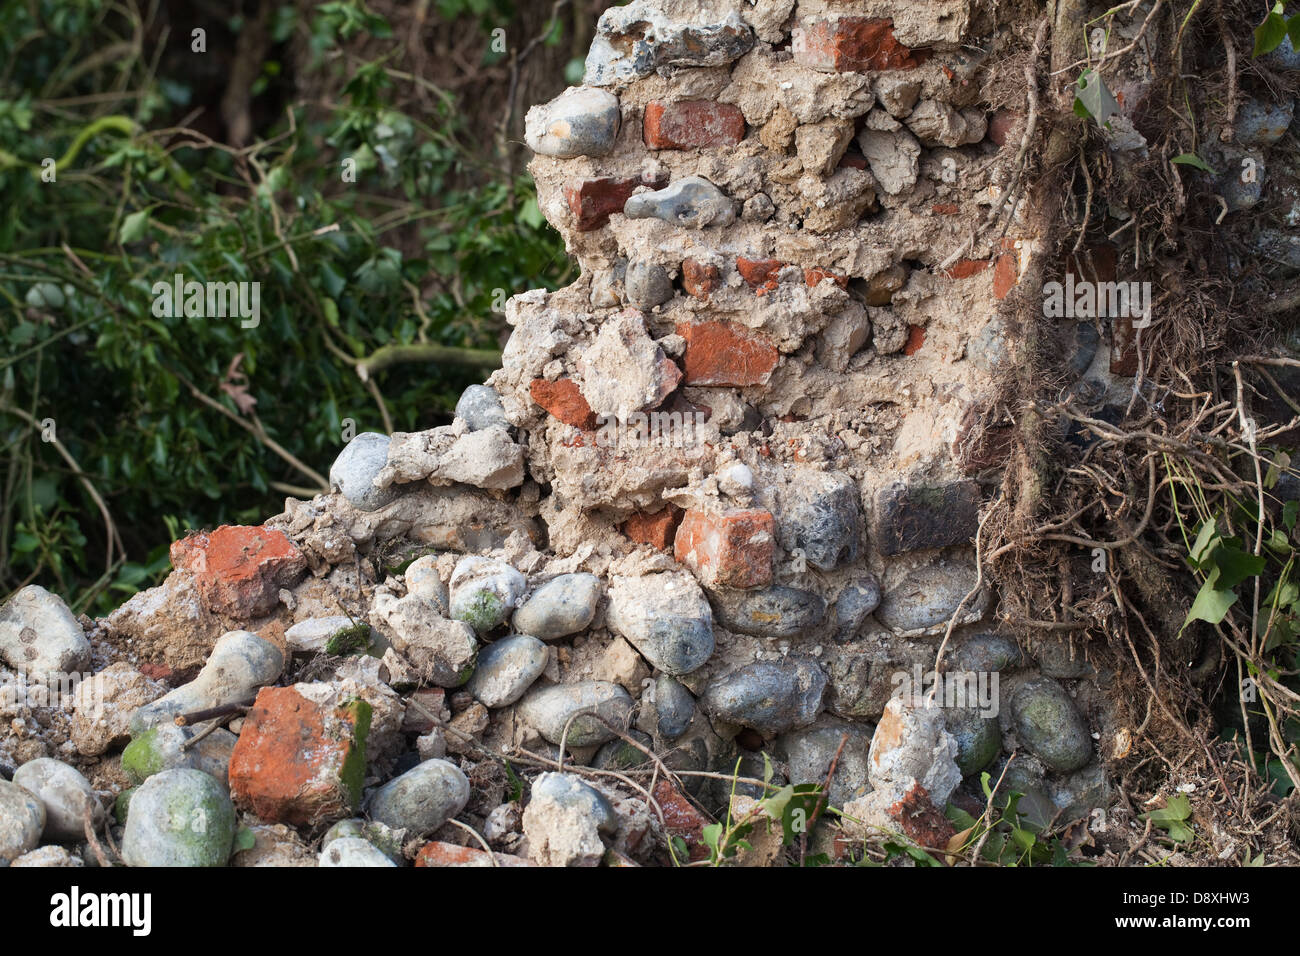 Flint stone wall, partially collapsed. Hickling Hall, Hickling , Norfolk. Awaiting repair and re-build. Broadland, Norfolk. Stock Photo